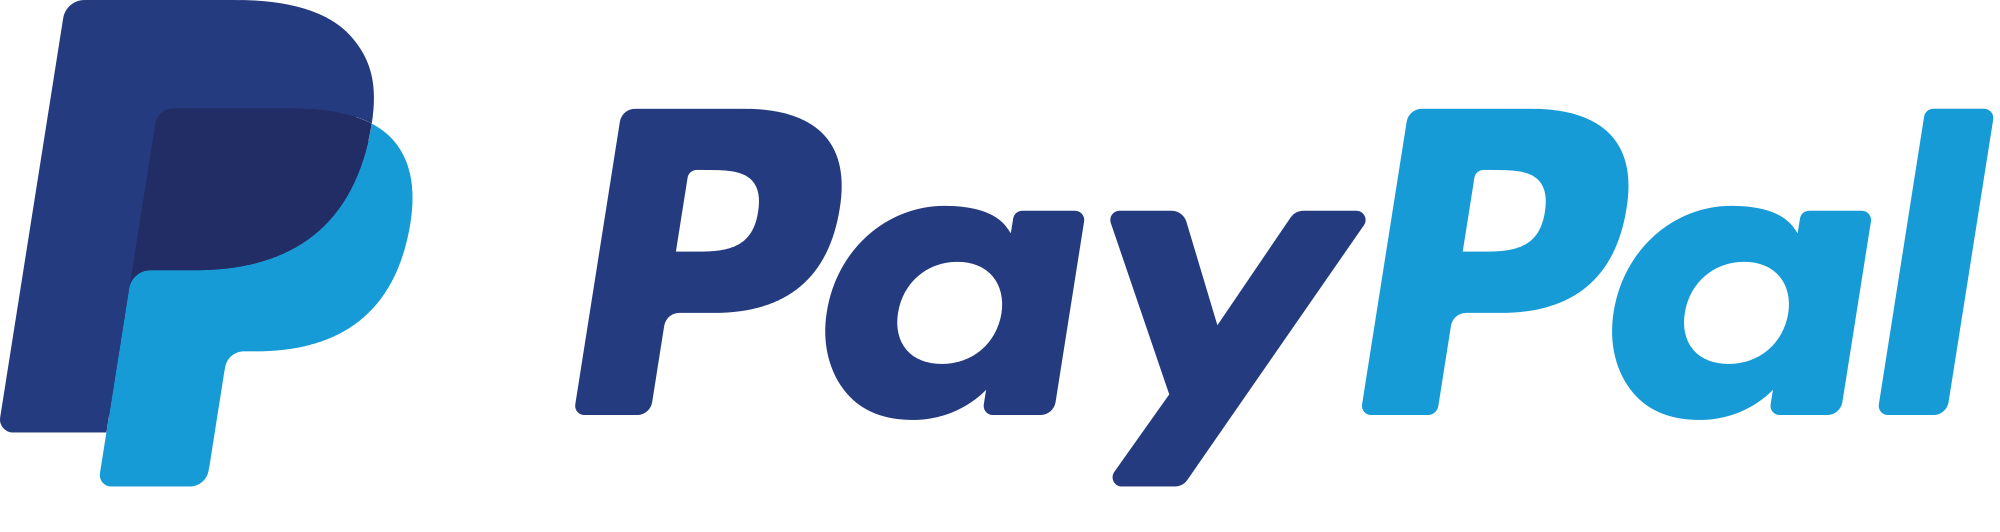 PayPal - zaplac.one - i już!